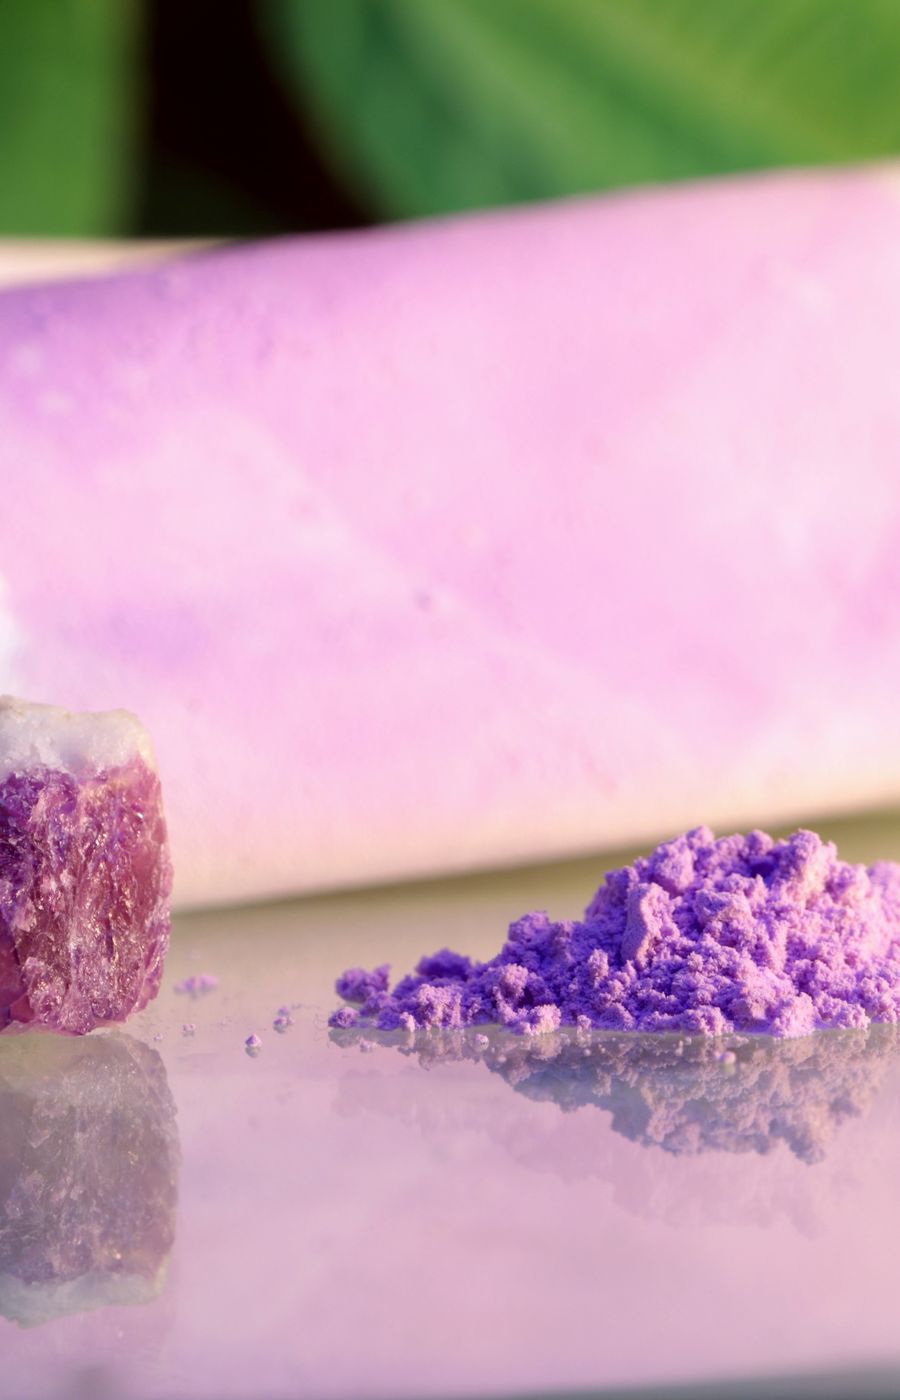 Different forms of hackmanite after UV exposure. Photo by Sami Vuori & Alicja Lawrynowicz